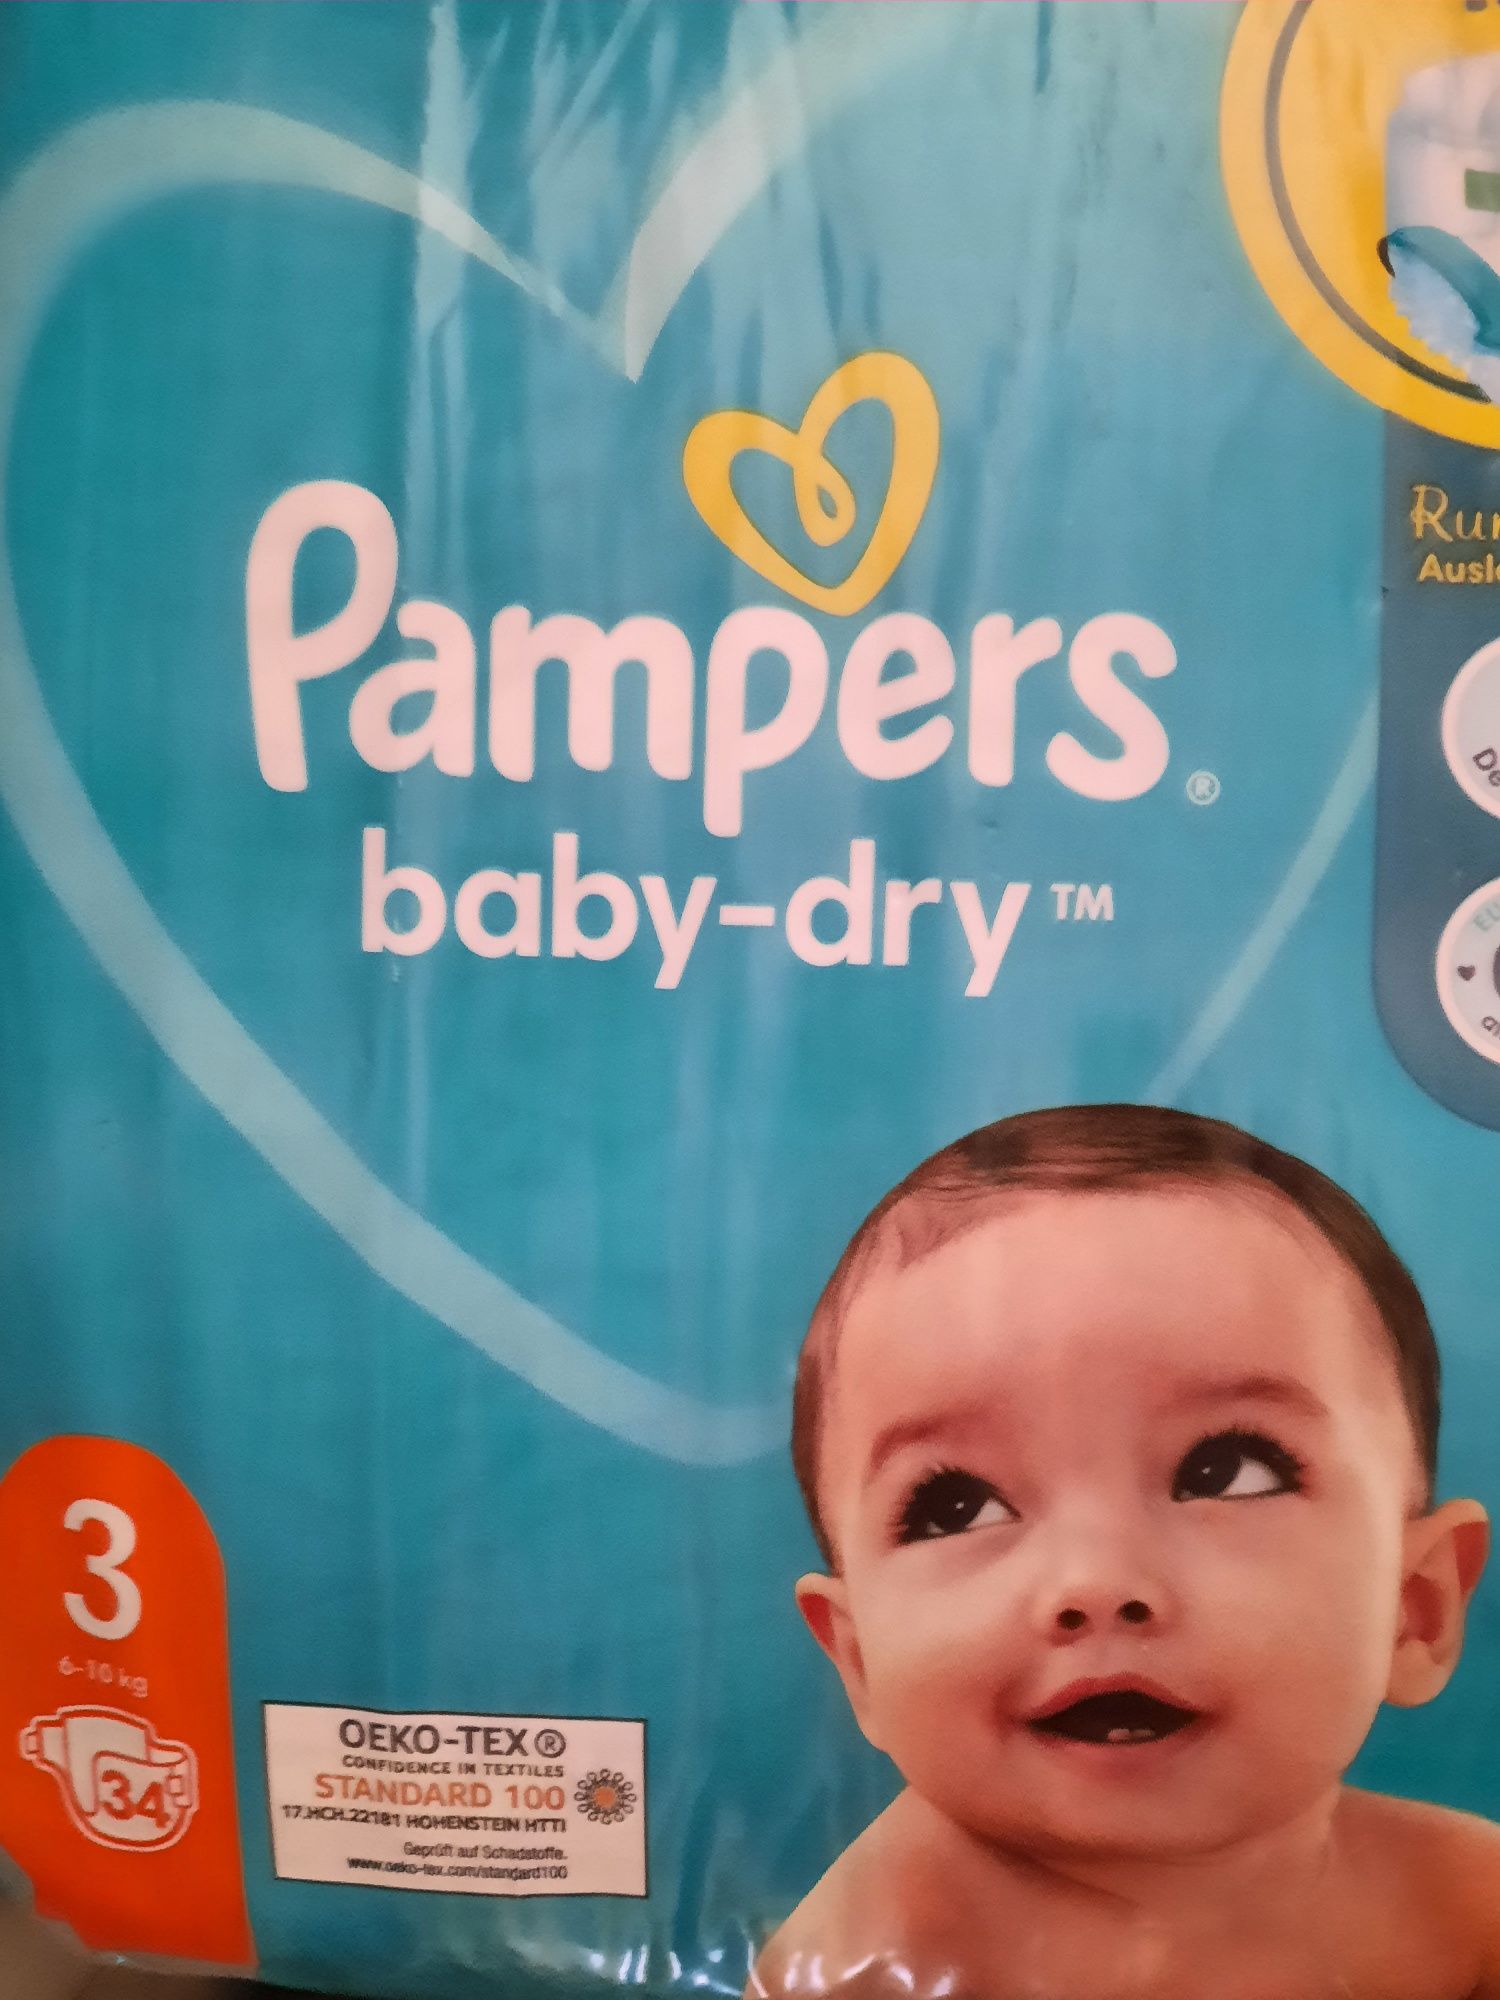 Pampers baby-dry